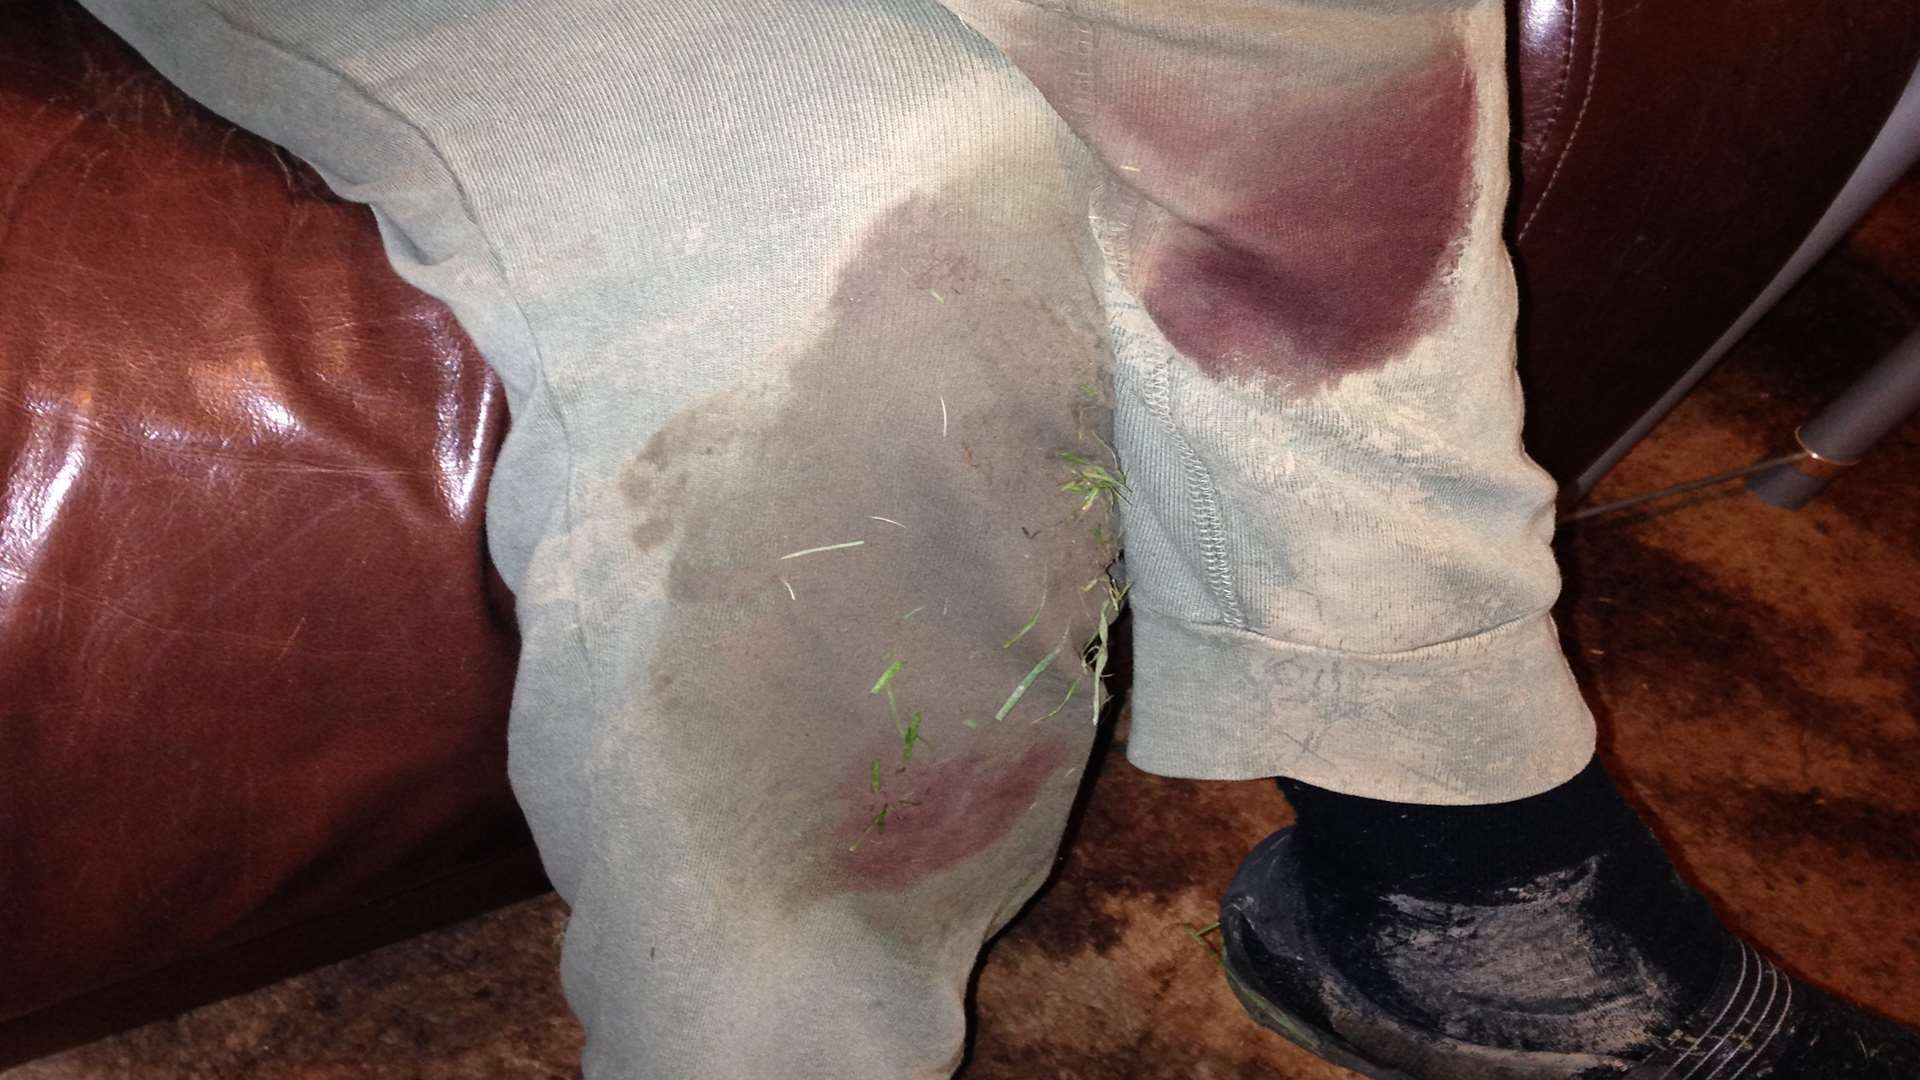 Susan Olsen's blood-stained jeans after defending her puppy from attack